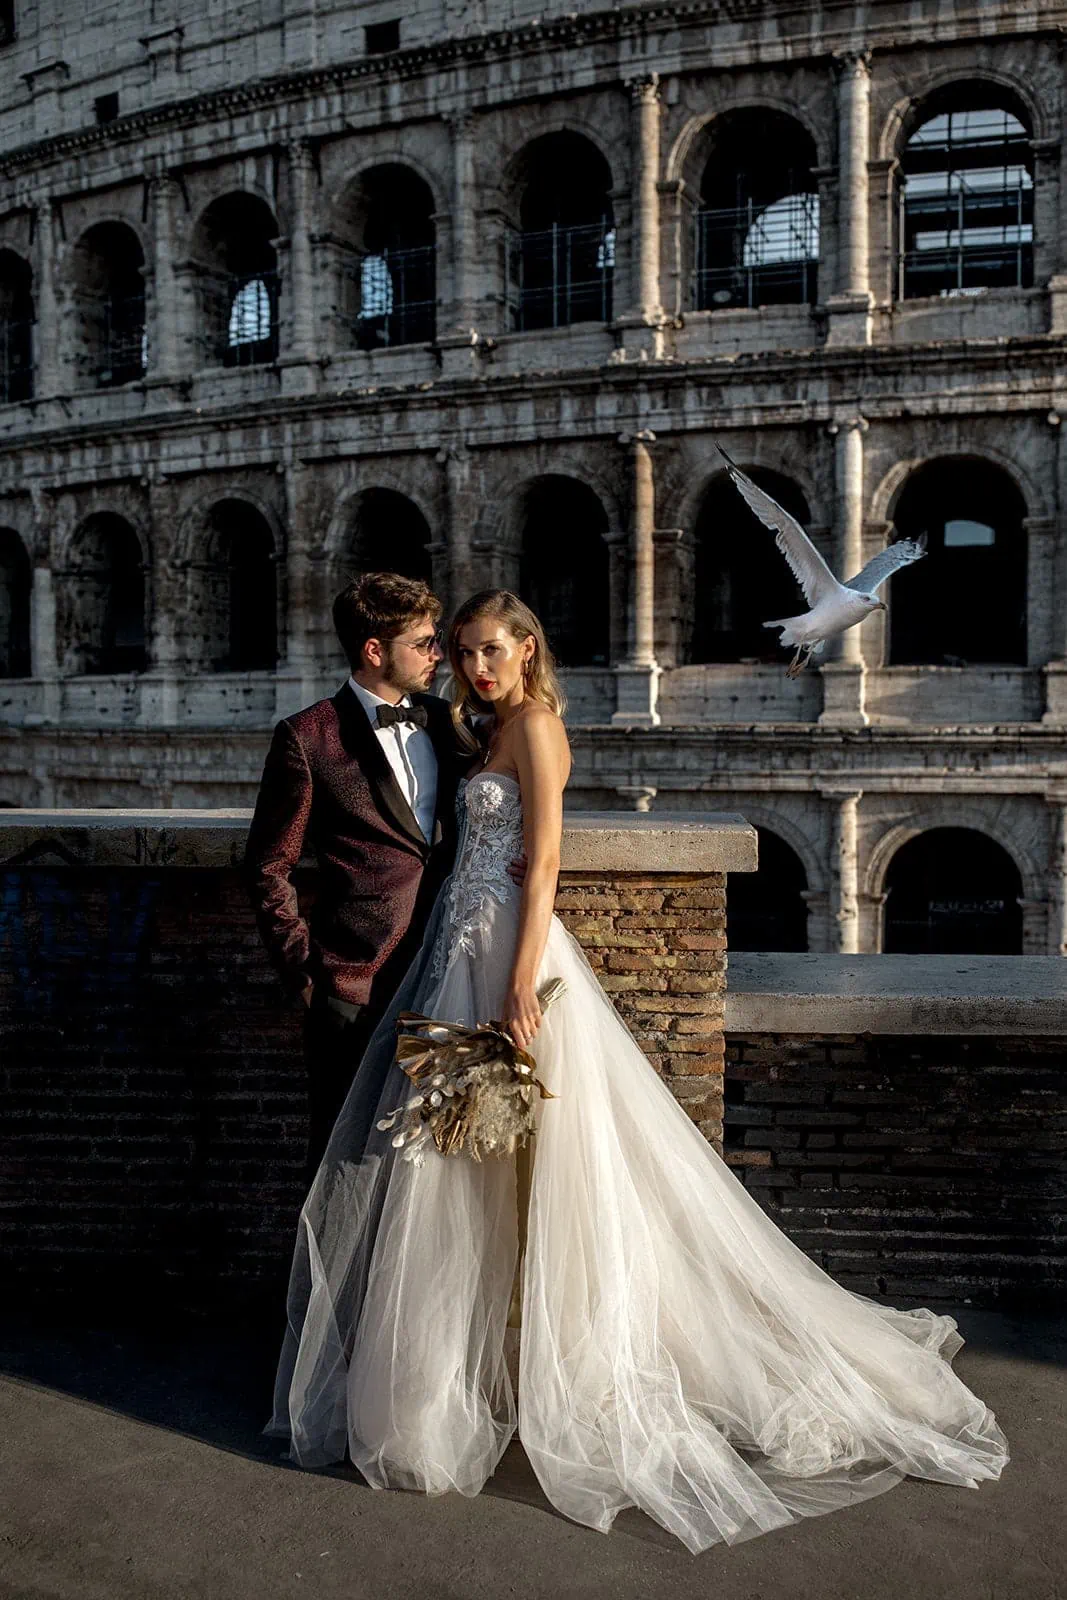 Bride and groom stand together in front of Coliseum in Rome, Italy